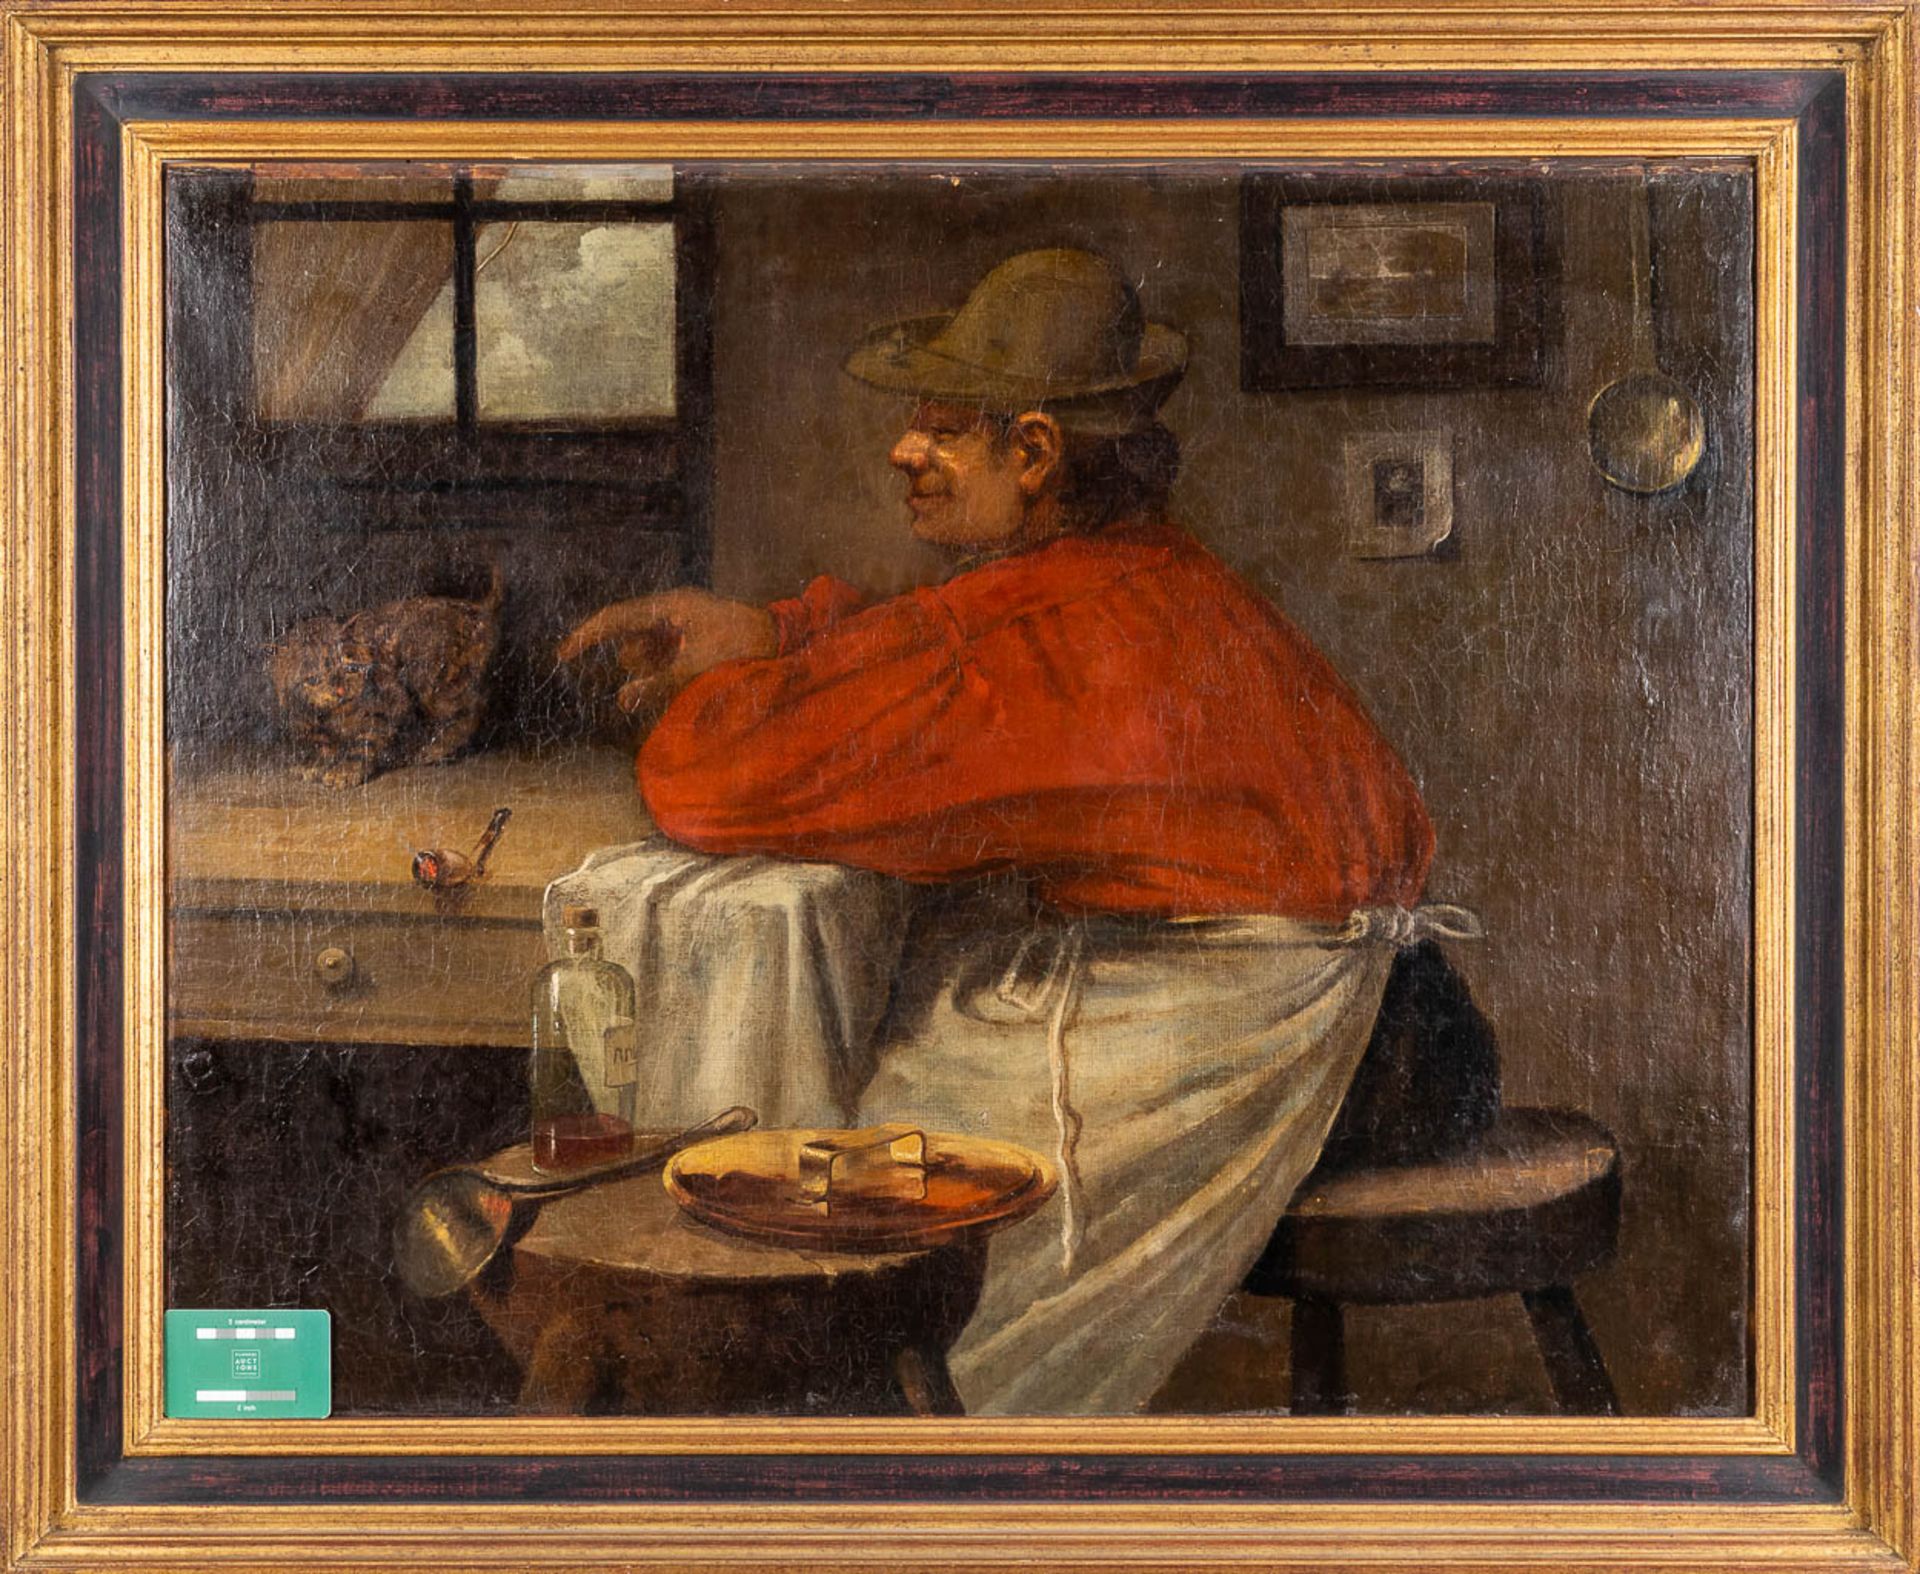 Farmer with a cat, a painting, oil on canvas. No signature found. 19th C. (W: 81 x H: 65 cm) - Image 2 of 8